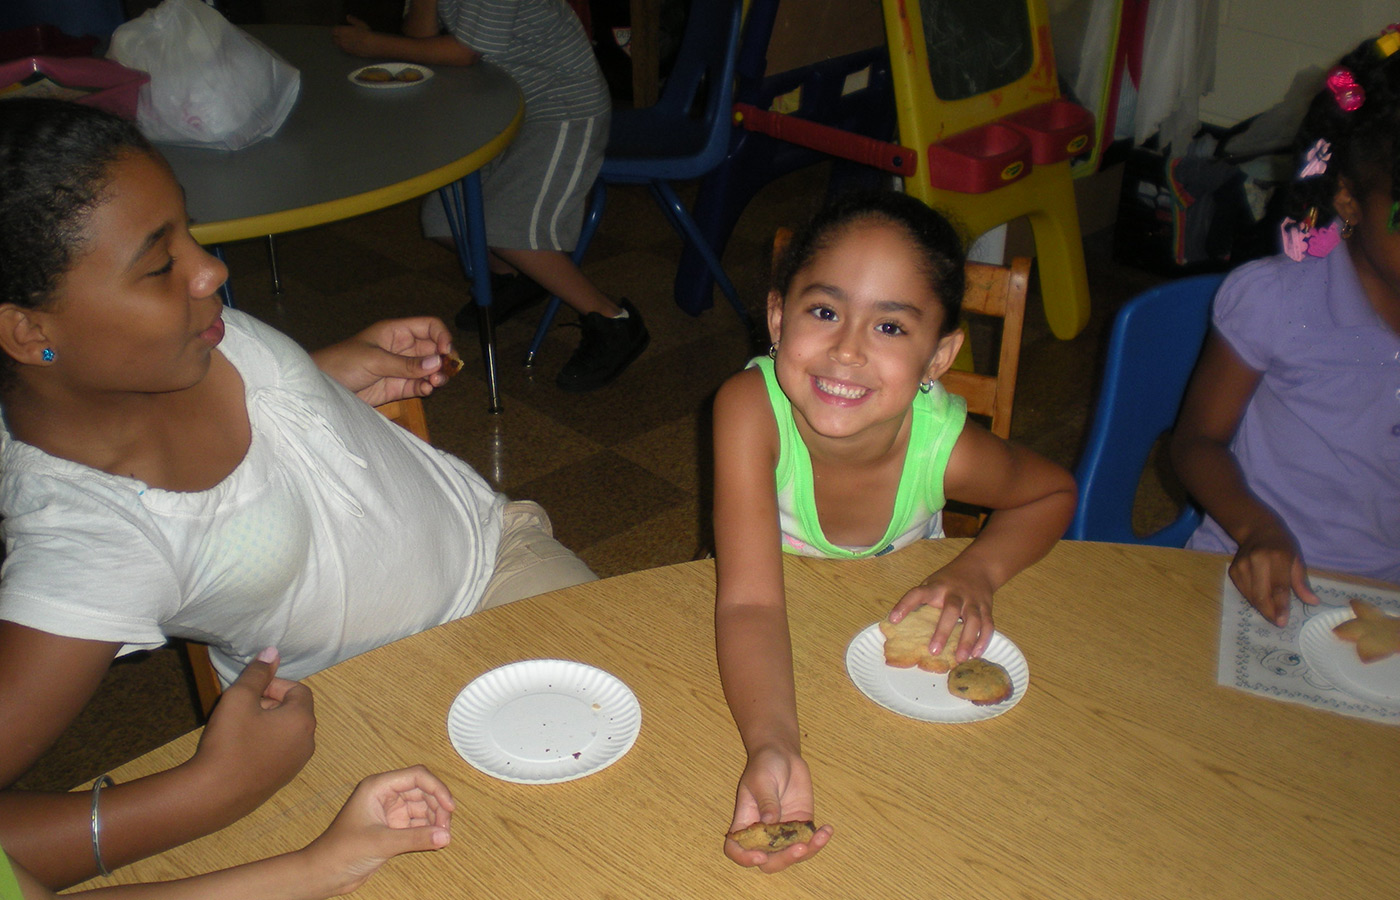 A child reaching across the table with a cookie.